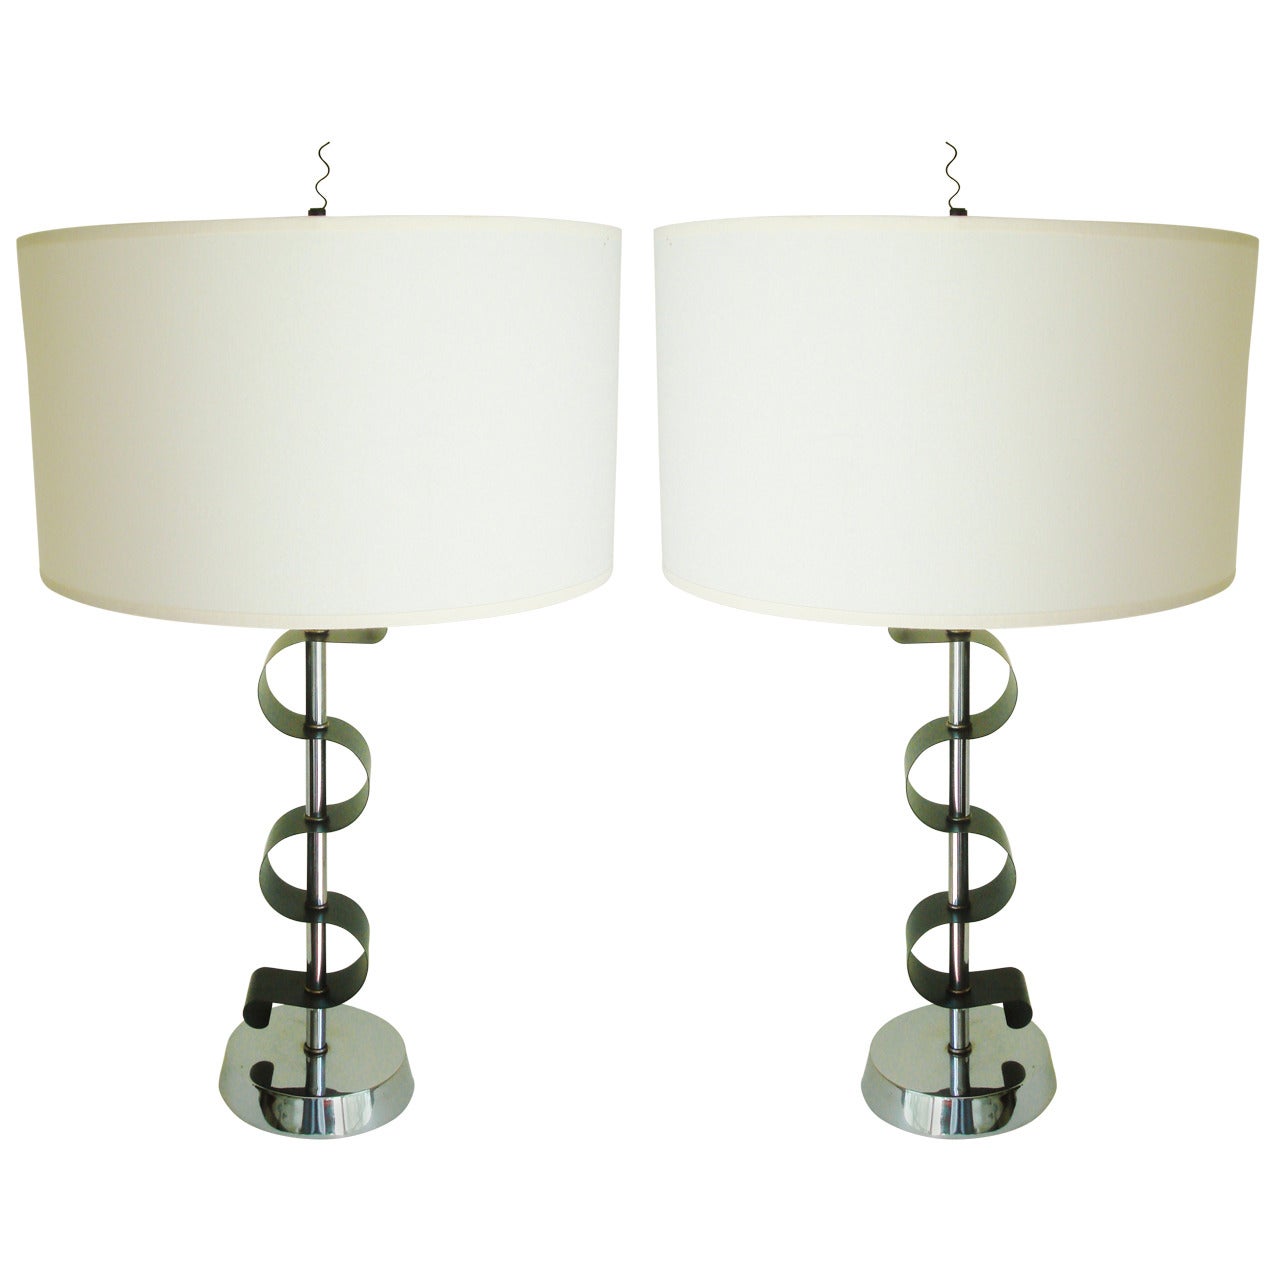 Pair of American Mid Century Chrome and Green "Ribbon" Table Lamps by Laurel For Sale